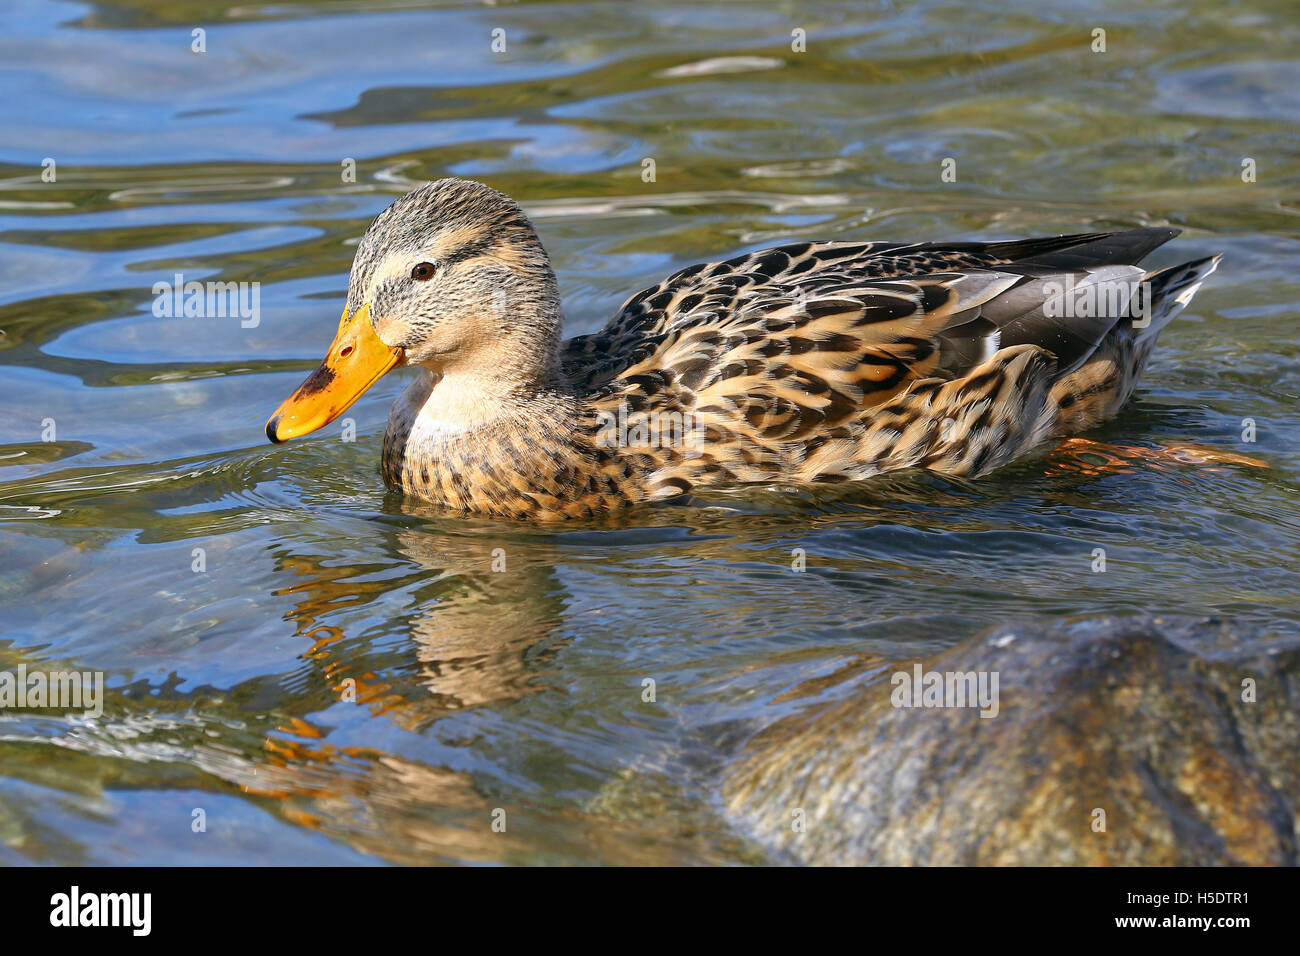 Female mallard duck swimming by a rock in blue water with reflections Stock Photo